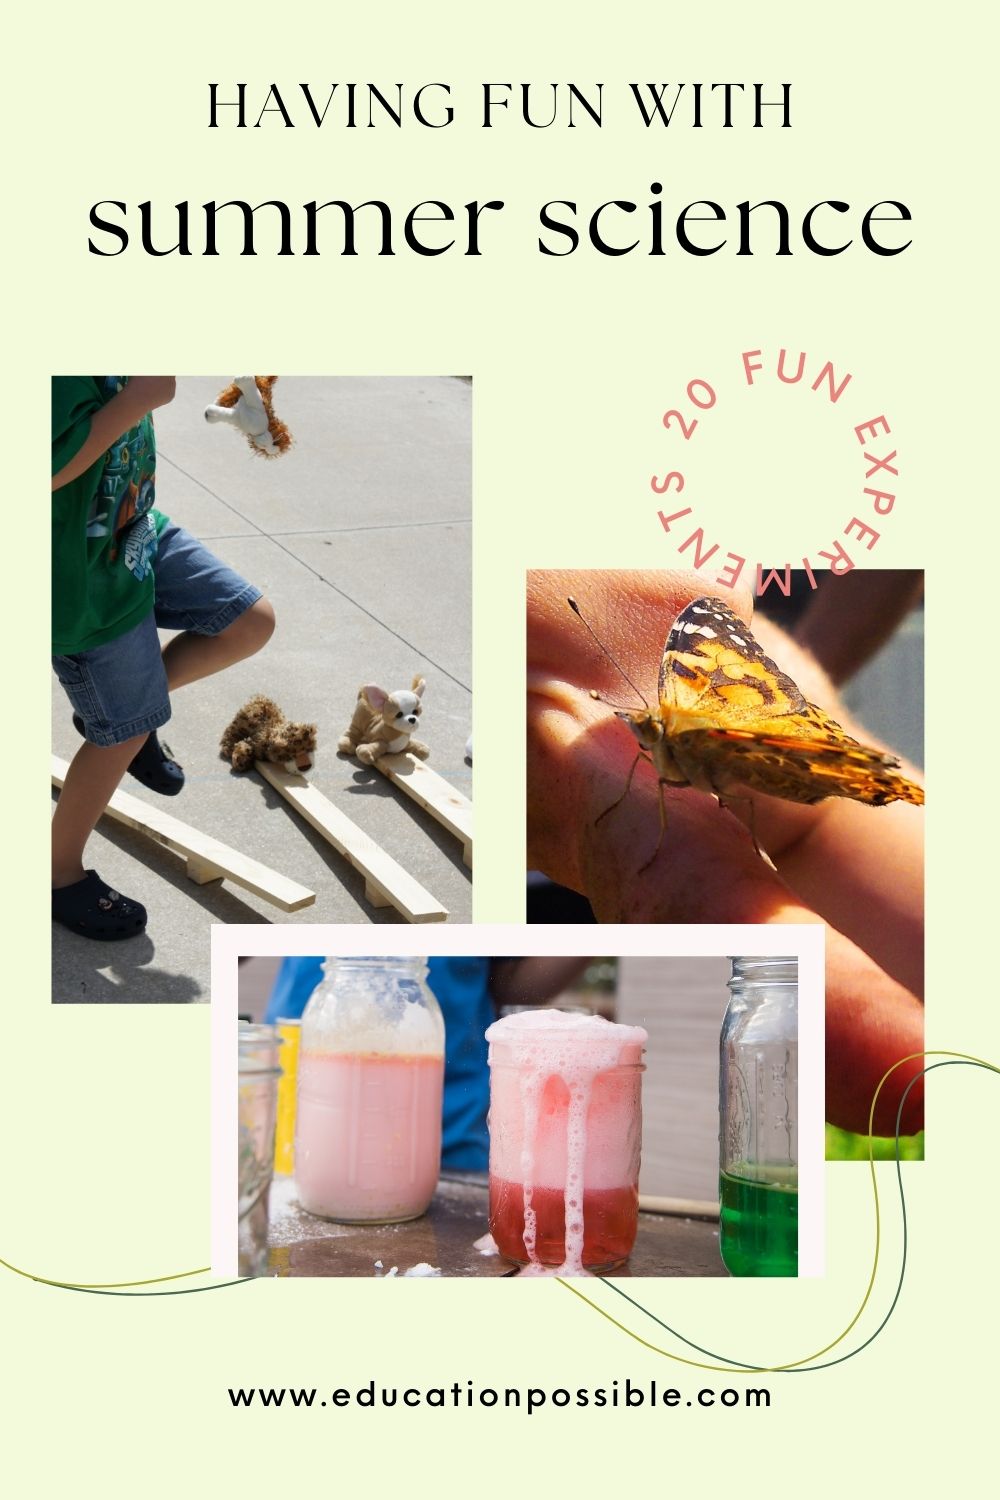 Collage of science experiments that can be done in summer. Boy stepping on wooden catapult to launch stuffed animal. 2 jars filled with pink liquid foaming, one with green. Hand holding painted lady butterfly.